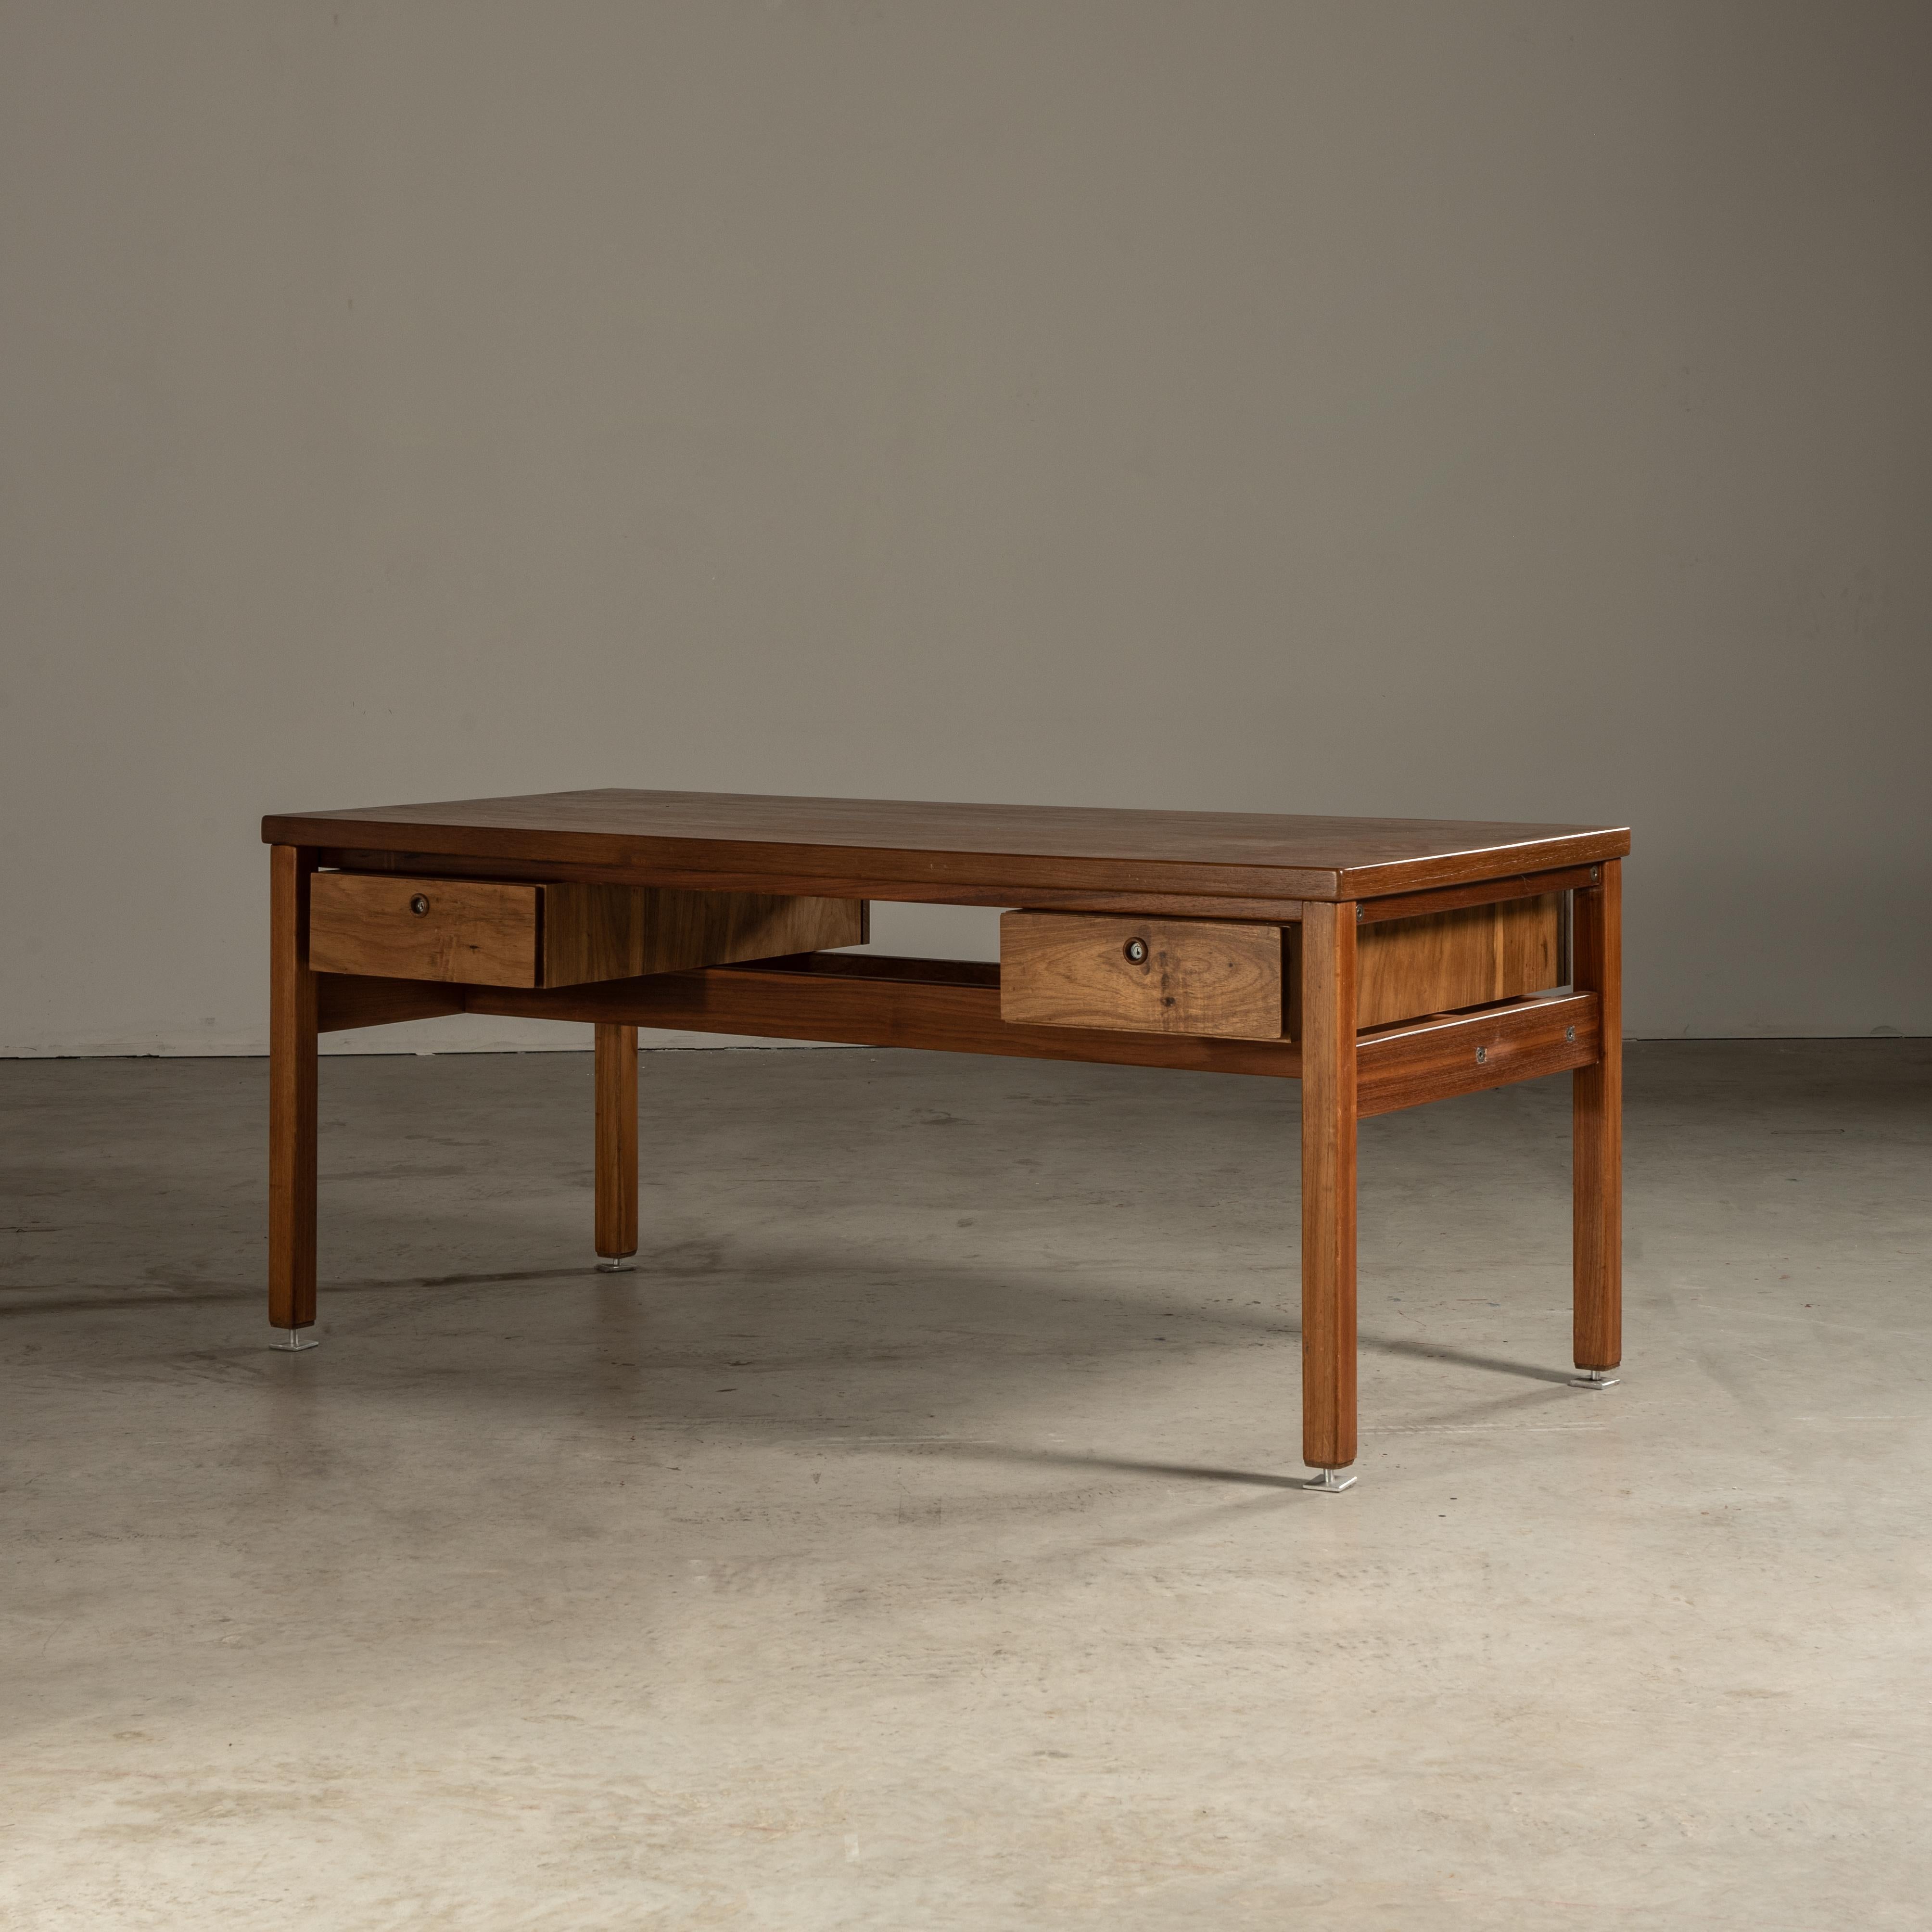 This side desk is a mid-20th century Brazilian furniture piece designed by Sergio Rodrigues, made with Freijó wood. Freijó is a type of timber that is often used in Brazilian furniture for its beautiful grain and warm color. 

The table stands on